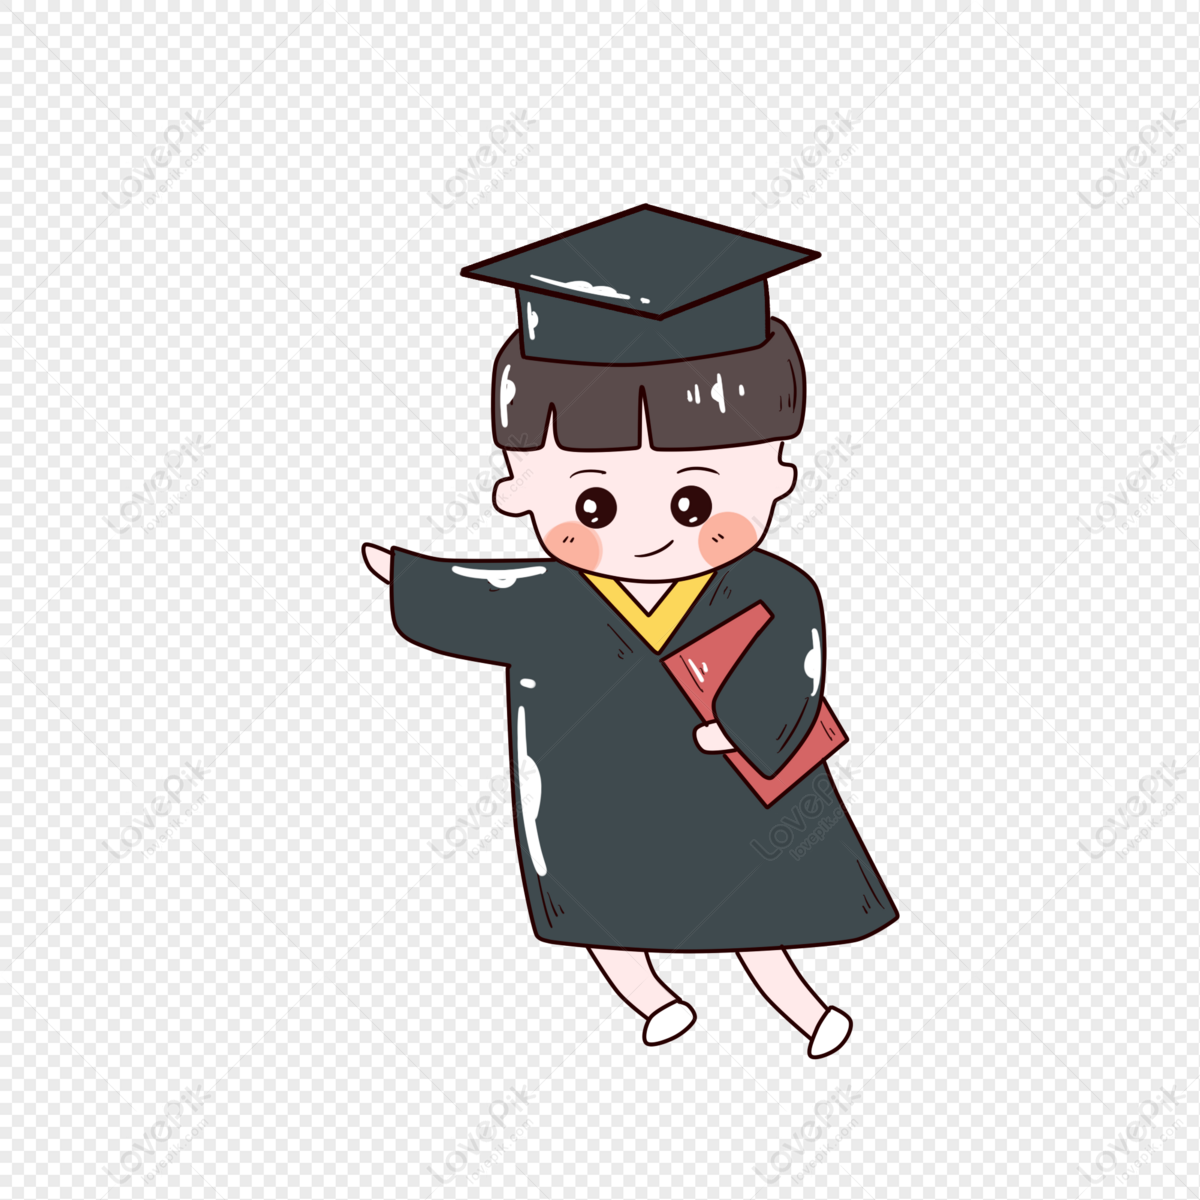 Bachelors Clothing Boy And Book PNG Free Download And Clipart Image For ...